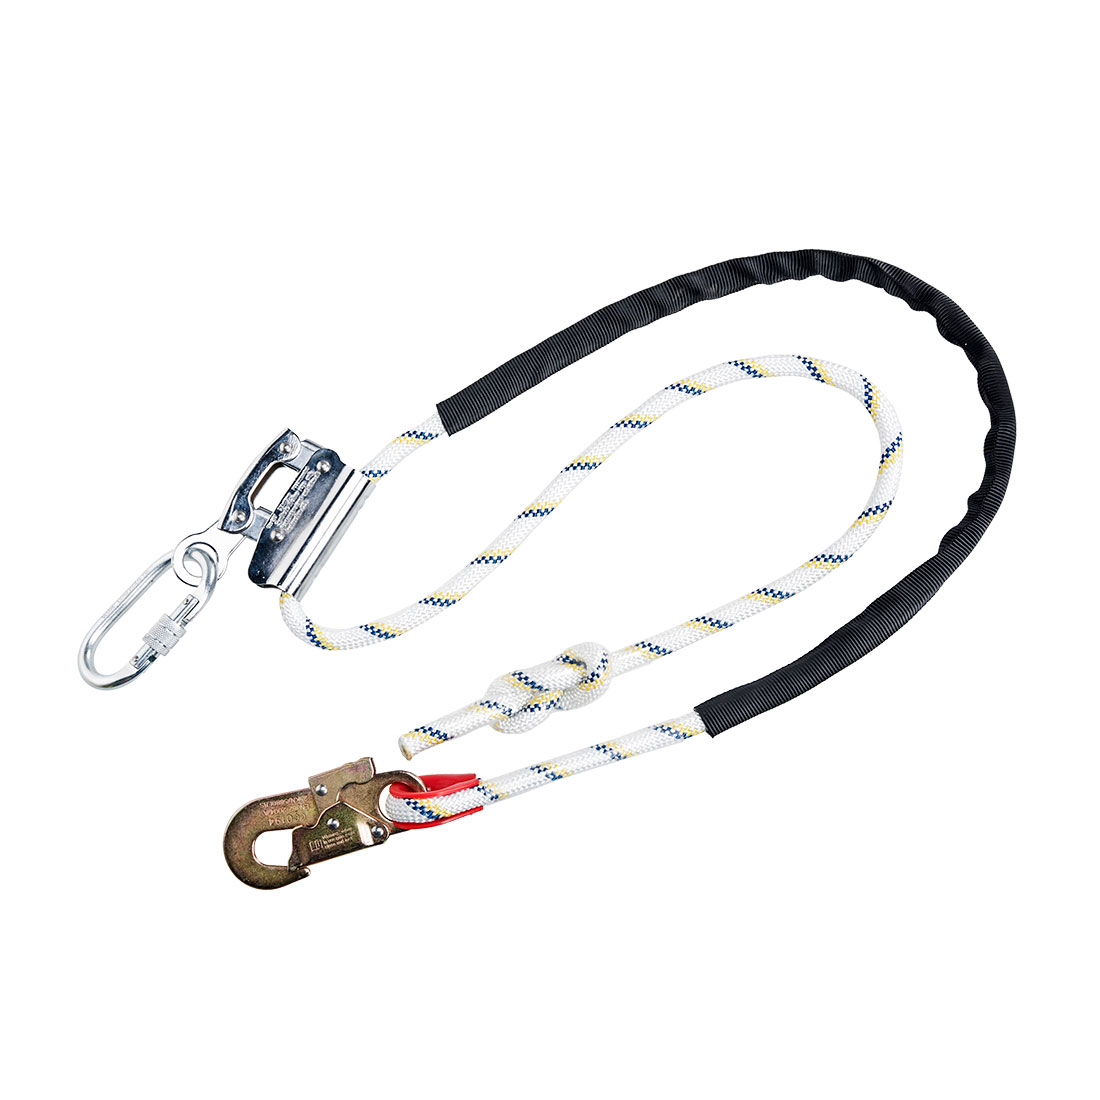 Durable Work Positioning Lanyard with Grip Adjuster